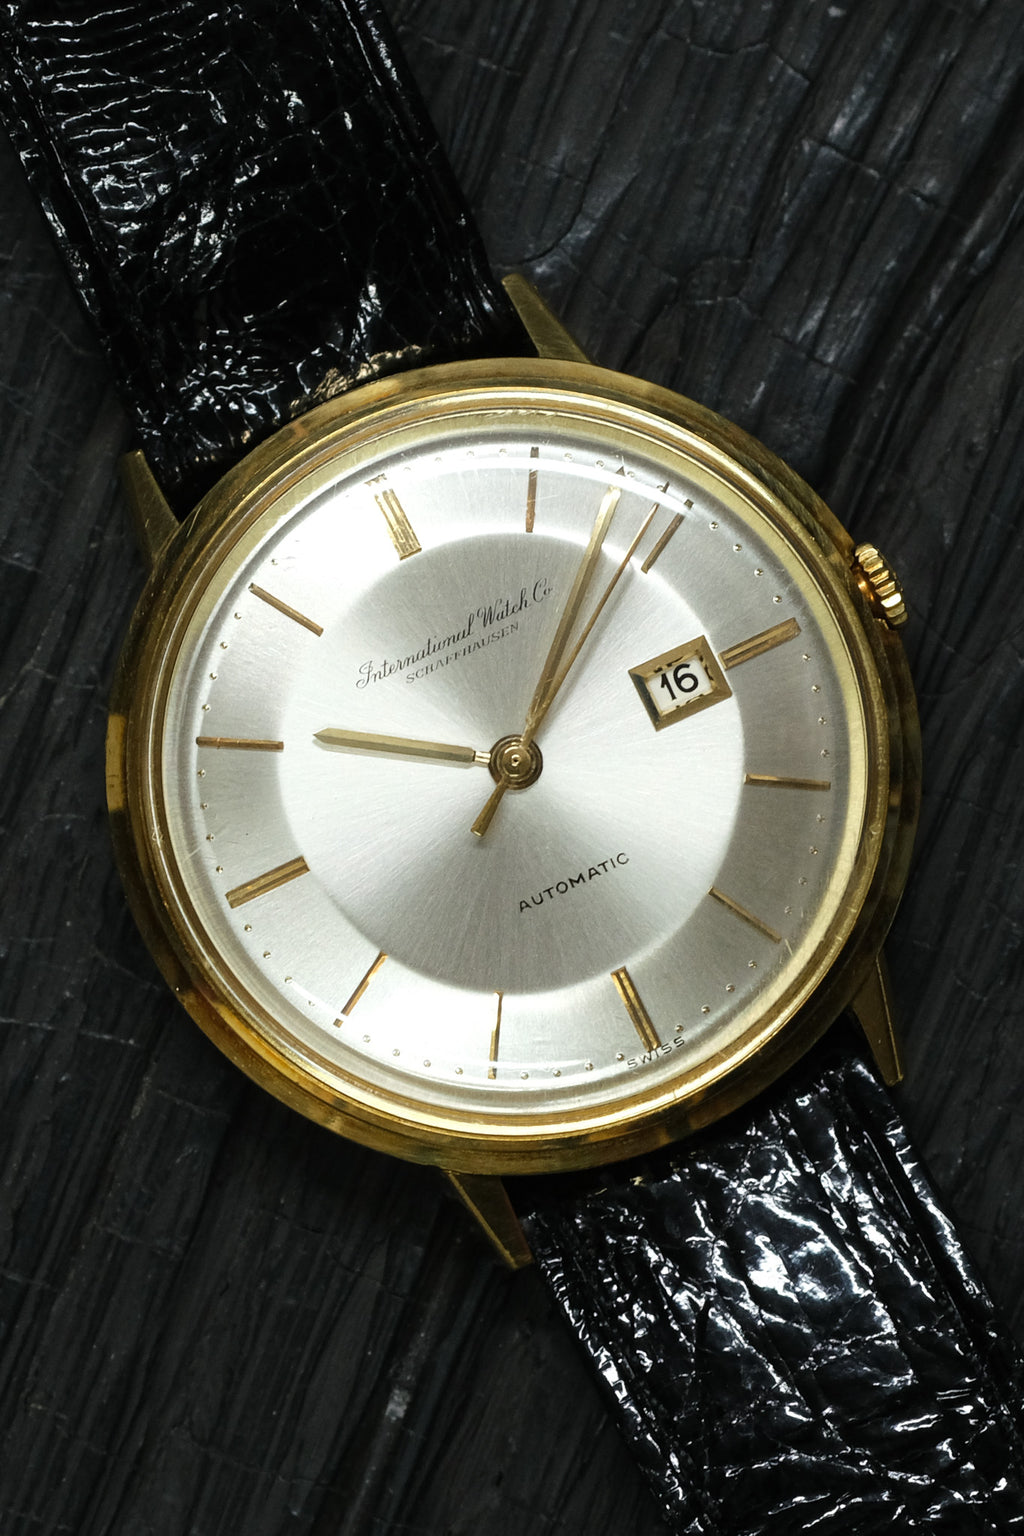 IWC - 18K Cal. 8531 Date – Artisans of Time